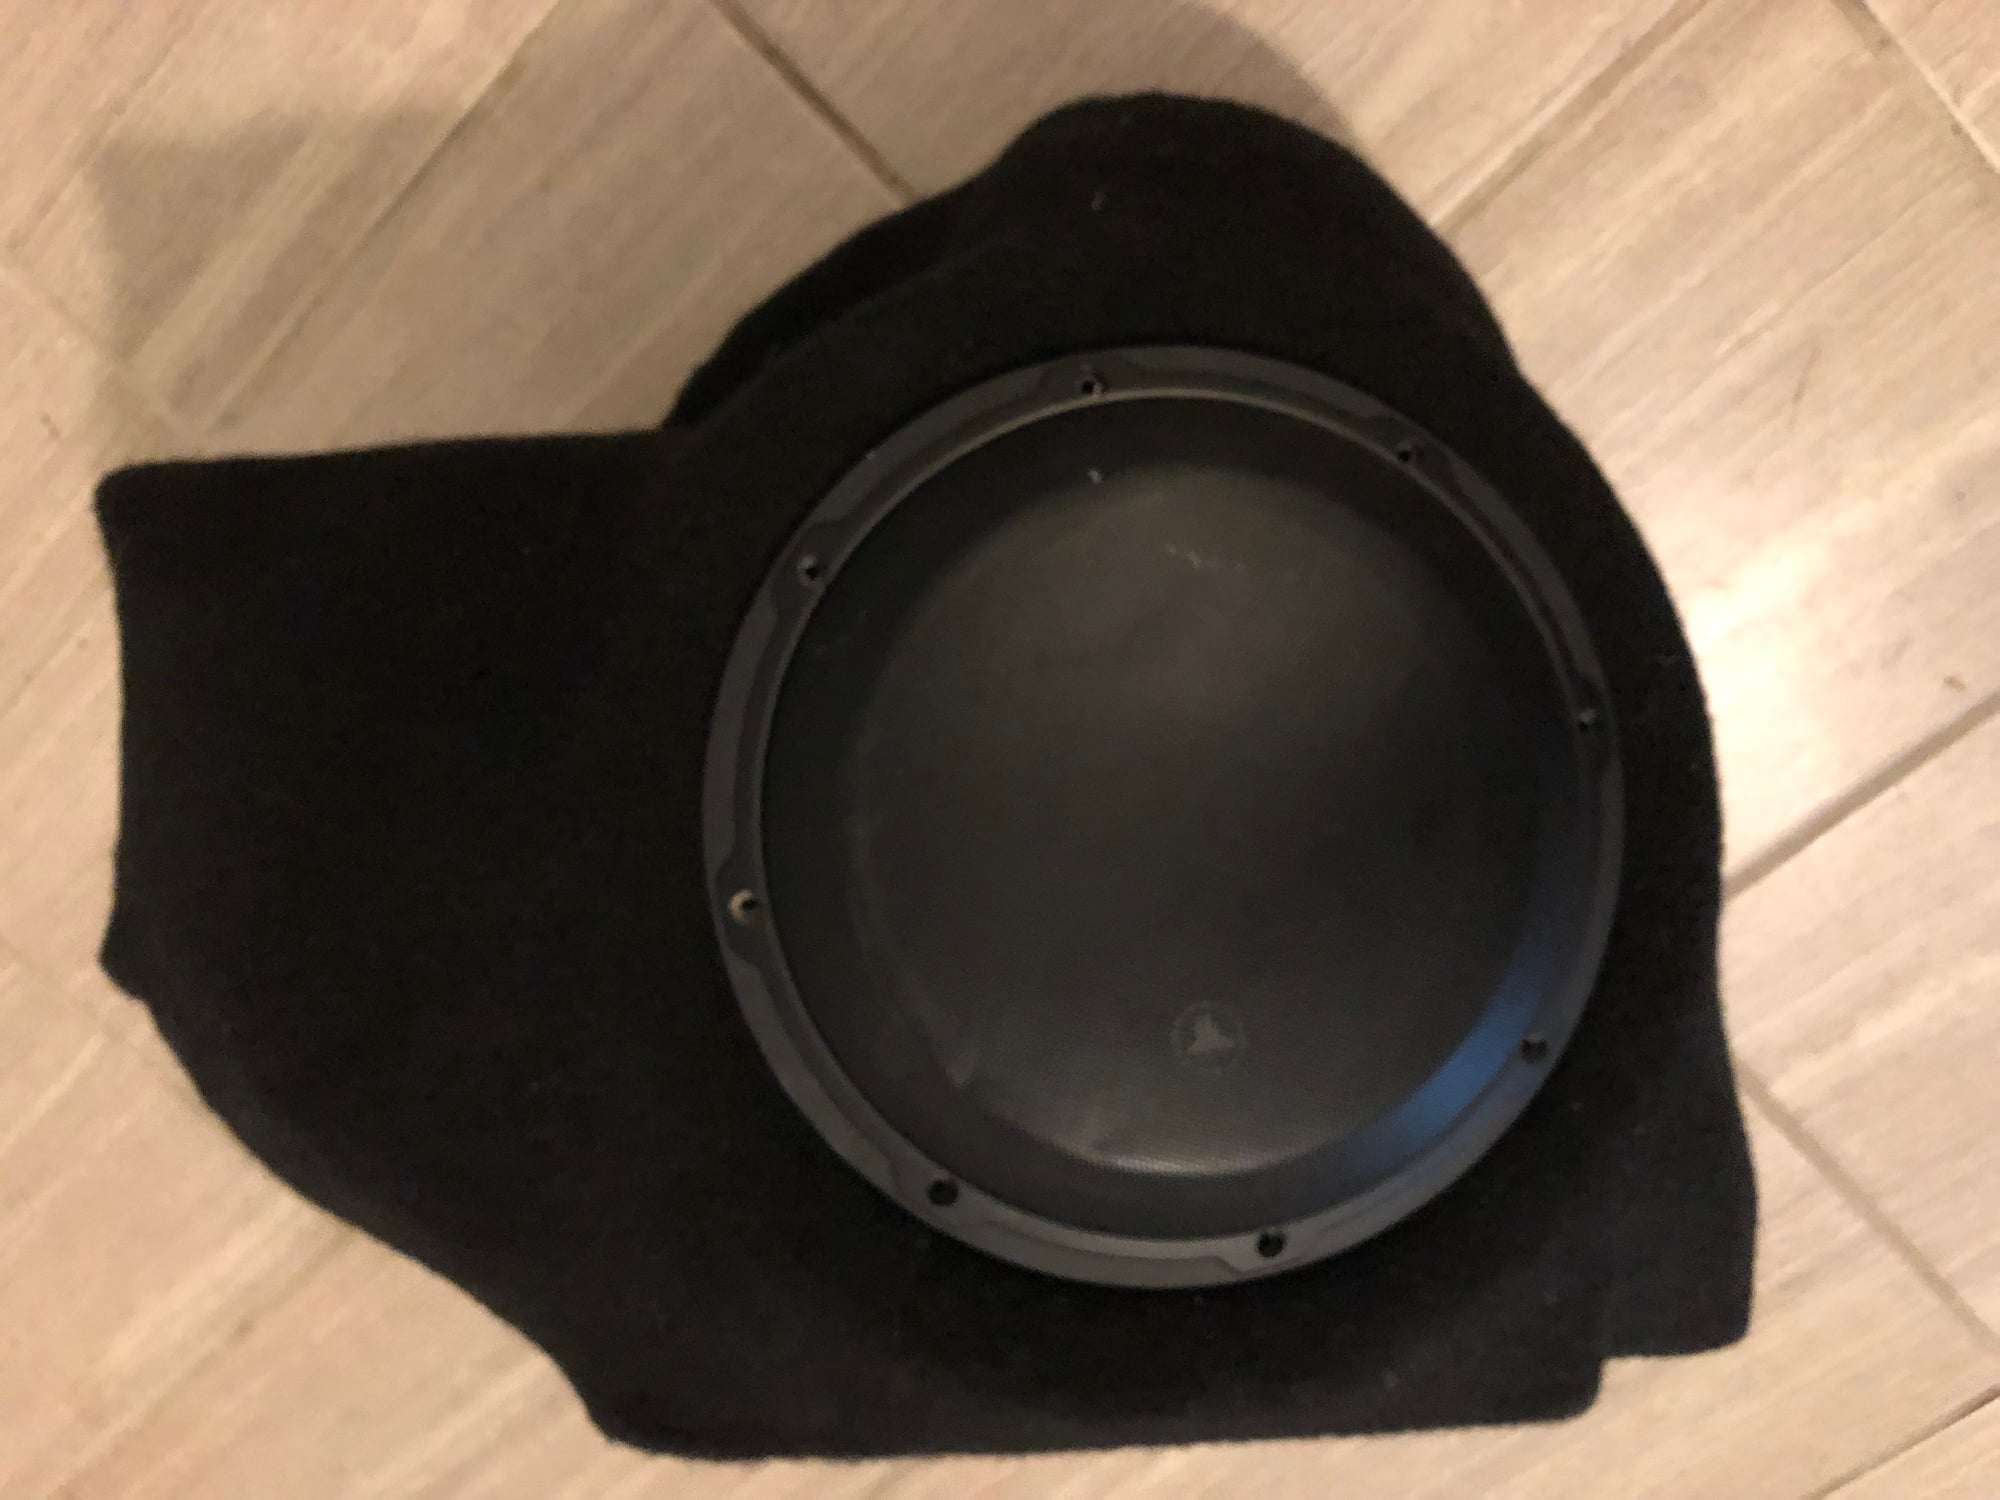 Audio Video/Electronics - Custom Made 10" Sub Enclosure and JBL woofer. - Used - 2014 to 2019 Lexus IS350 - 2014 to 2019 Lexus IS250 - Greenland, NH 03840, United States